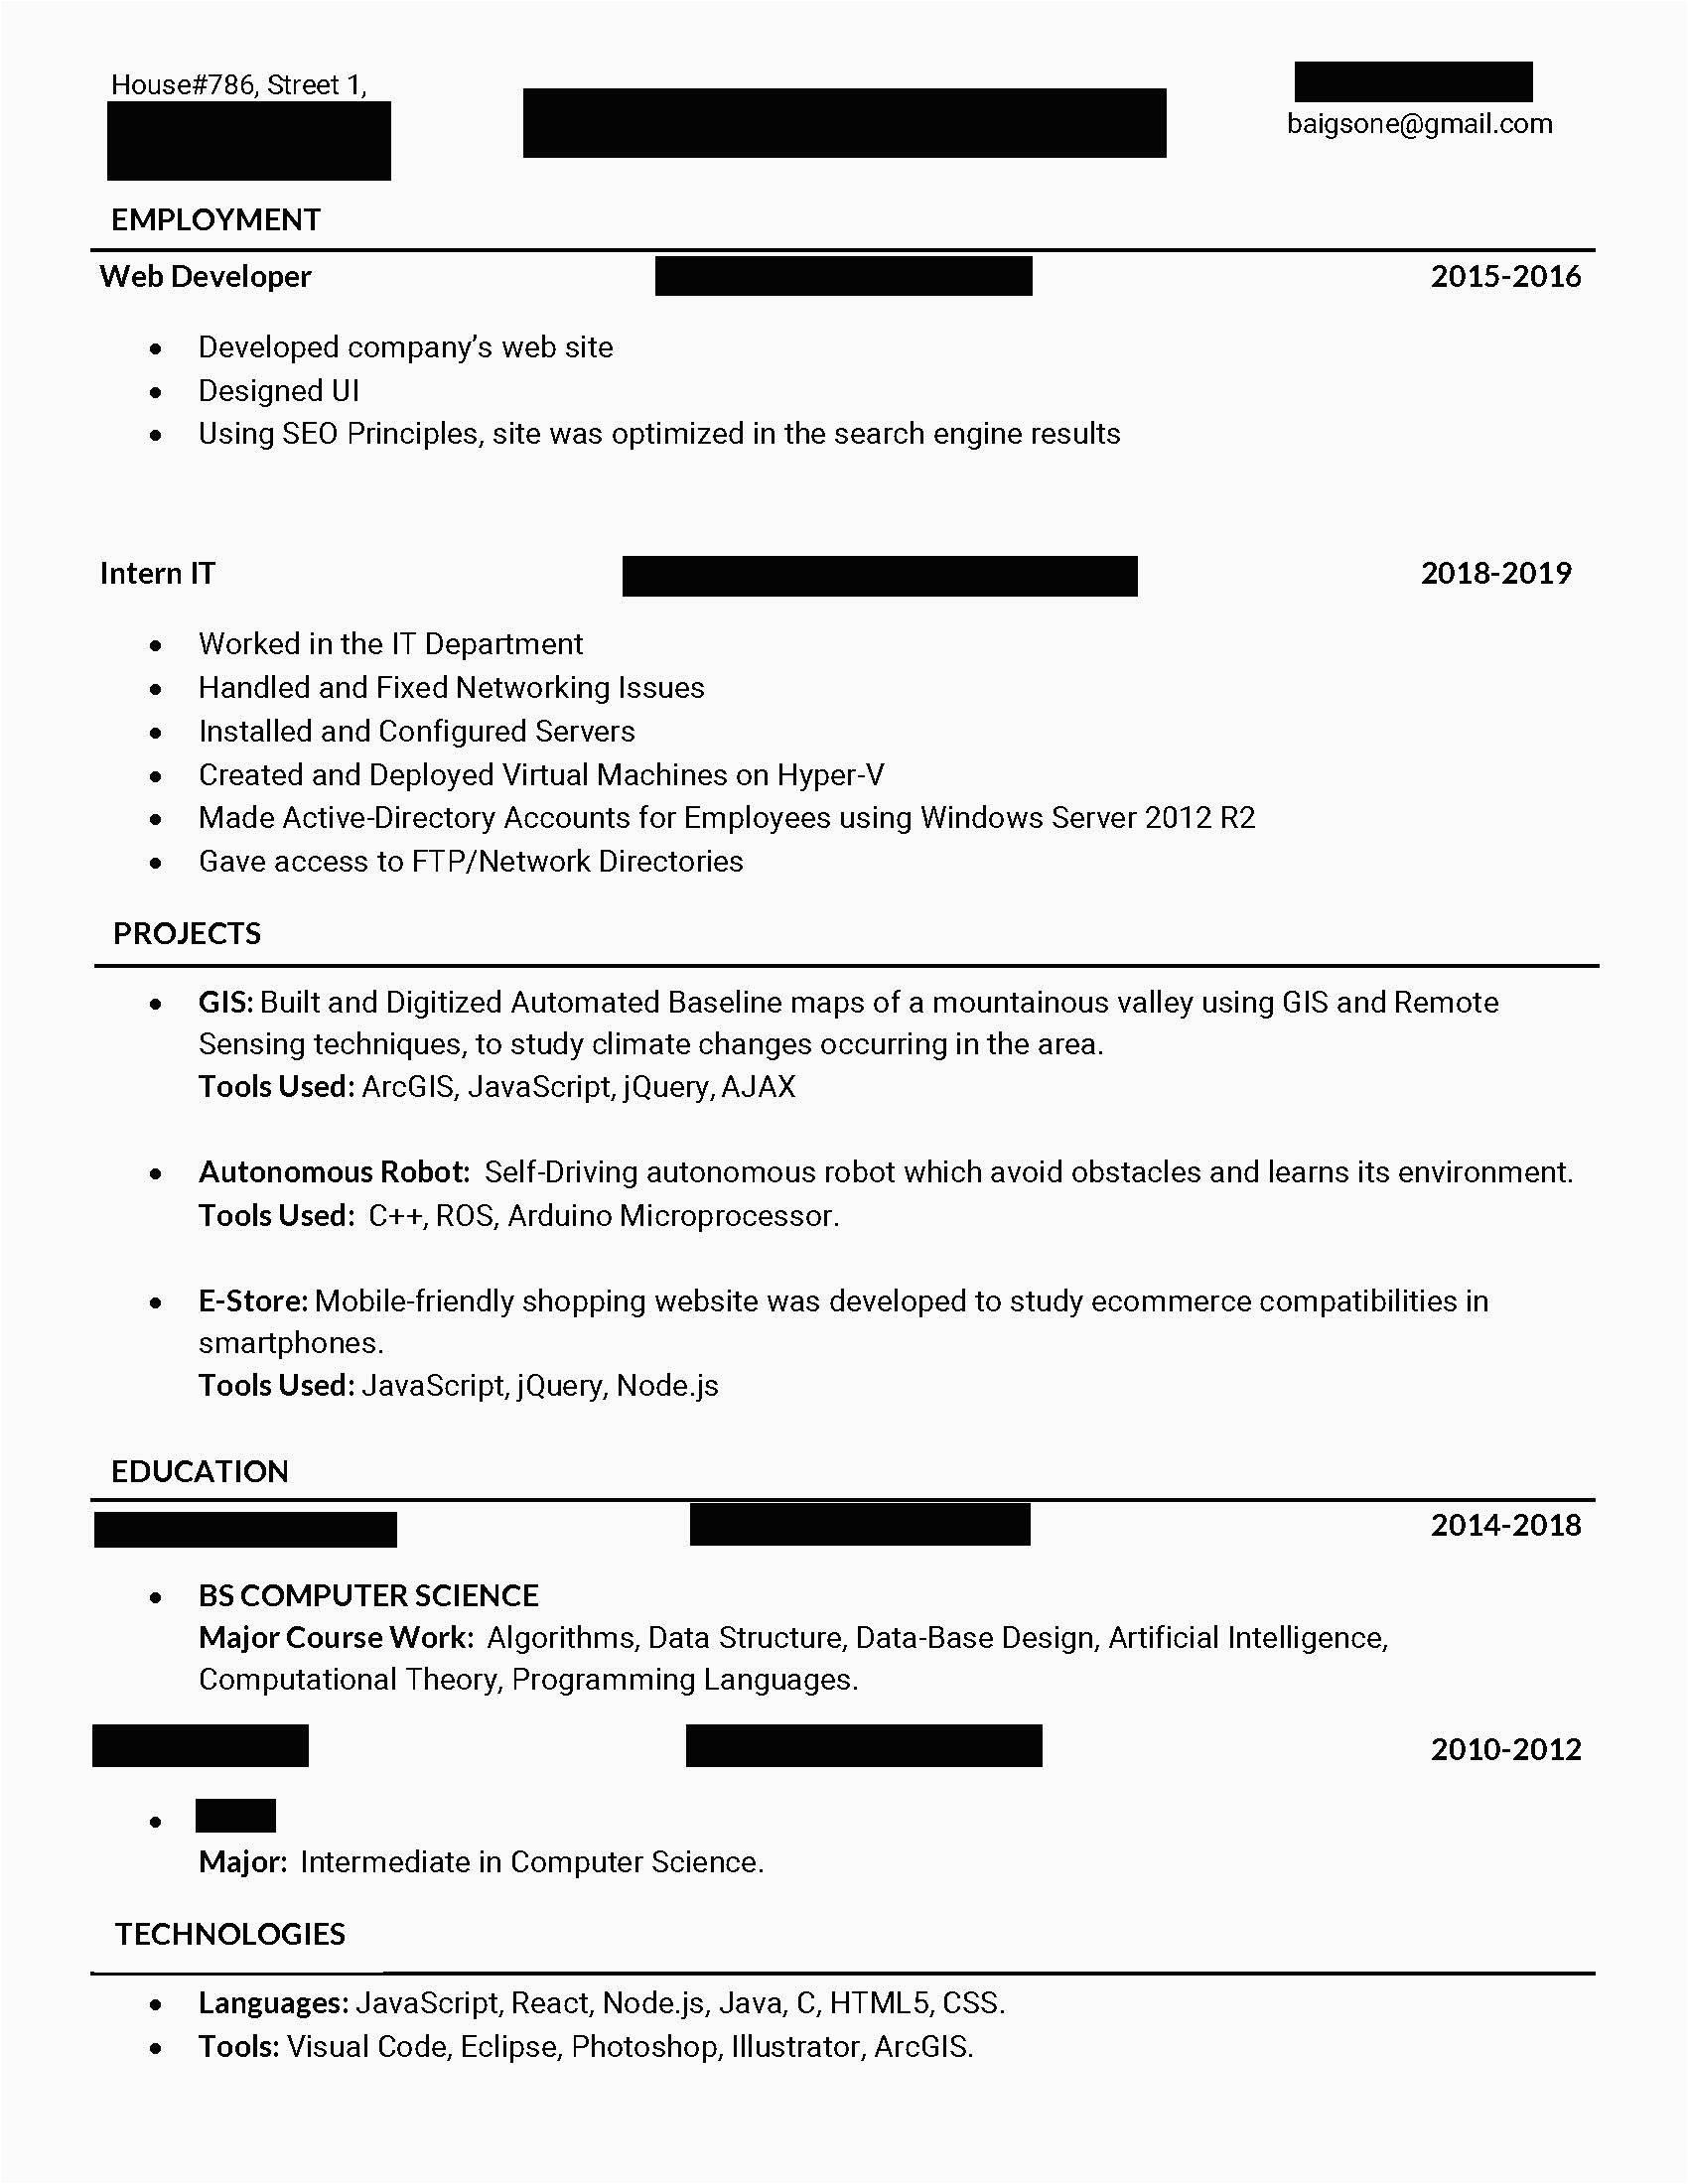 Sample Resume for Computer Science Fresh Graduate Reddit A Puter Science Graduate From A Third World Country Currently